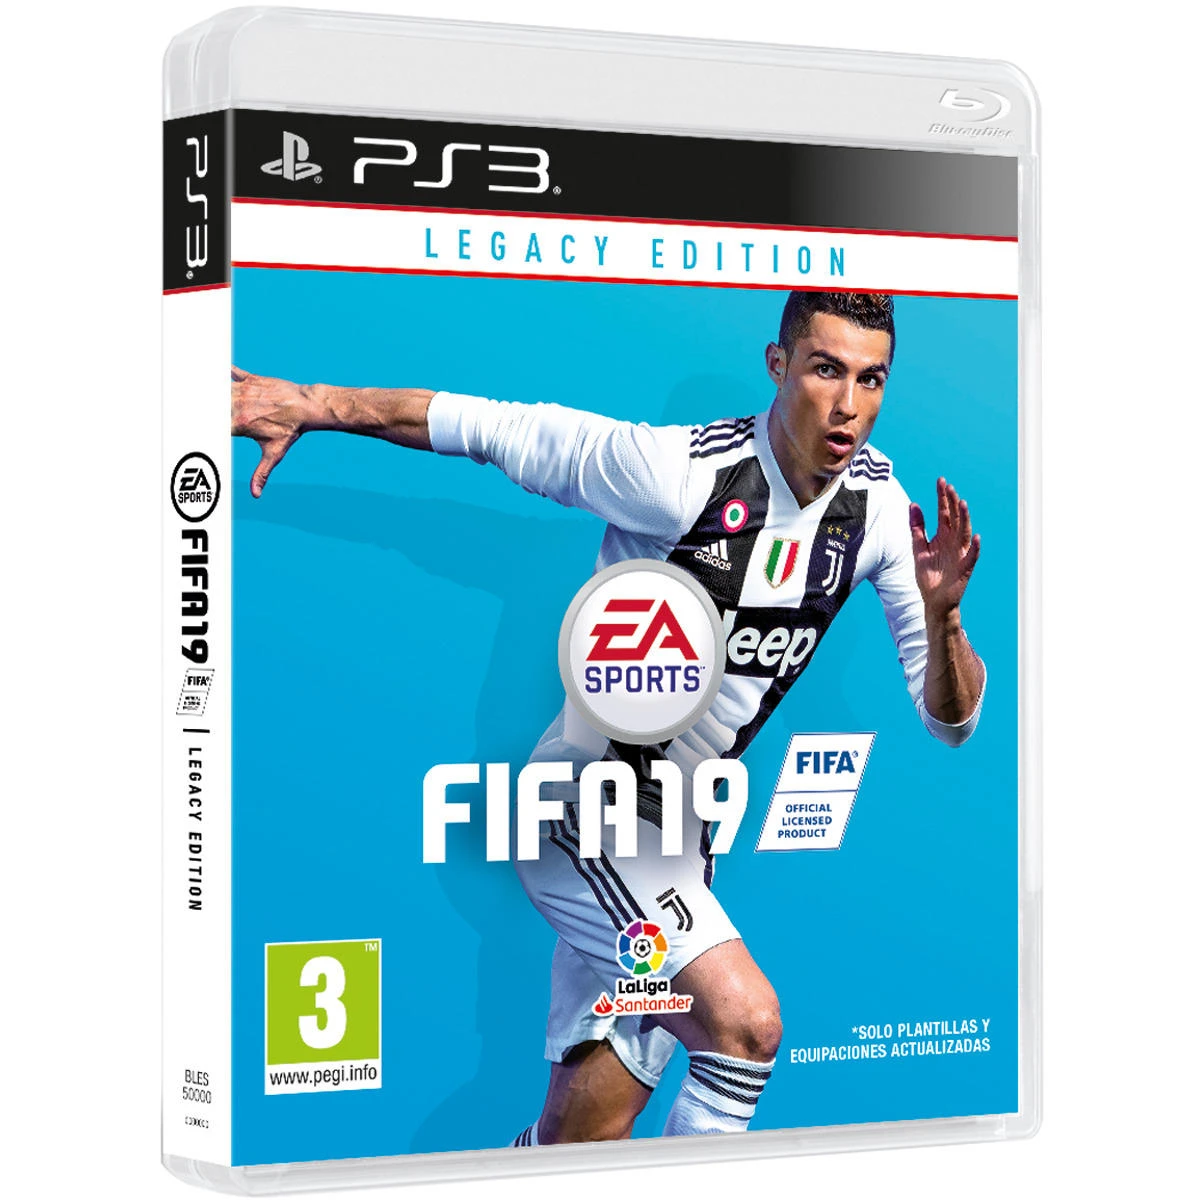 verlies Nacht Verslijten Fifa 19 Legacy Edition Ps3 Games Playstation 3 Electronic Arts Software  S.l. Sports Age 3 + - Game Deals - AliExpress